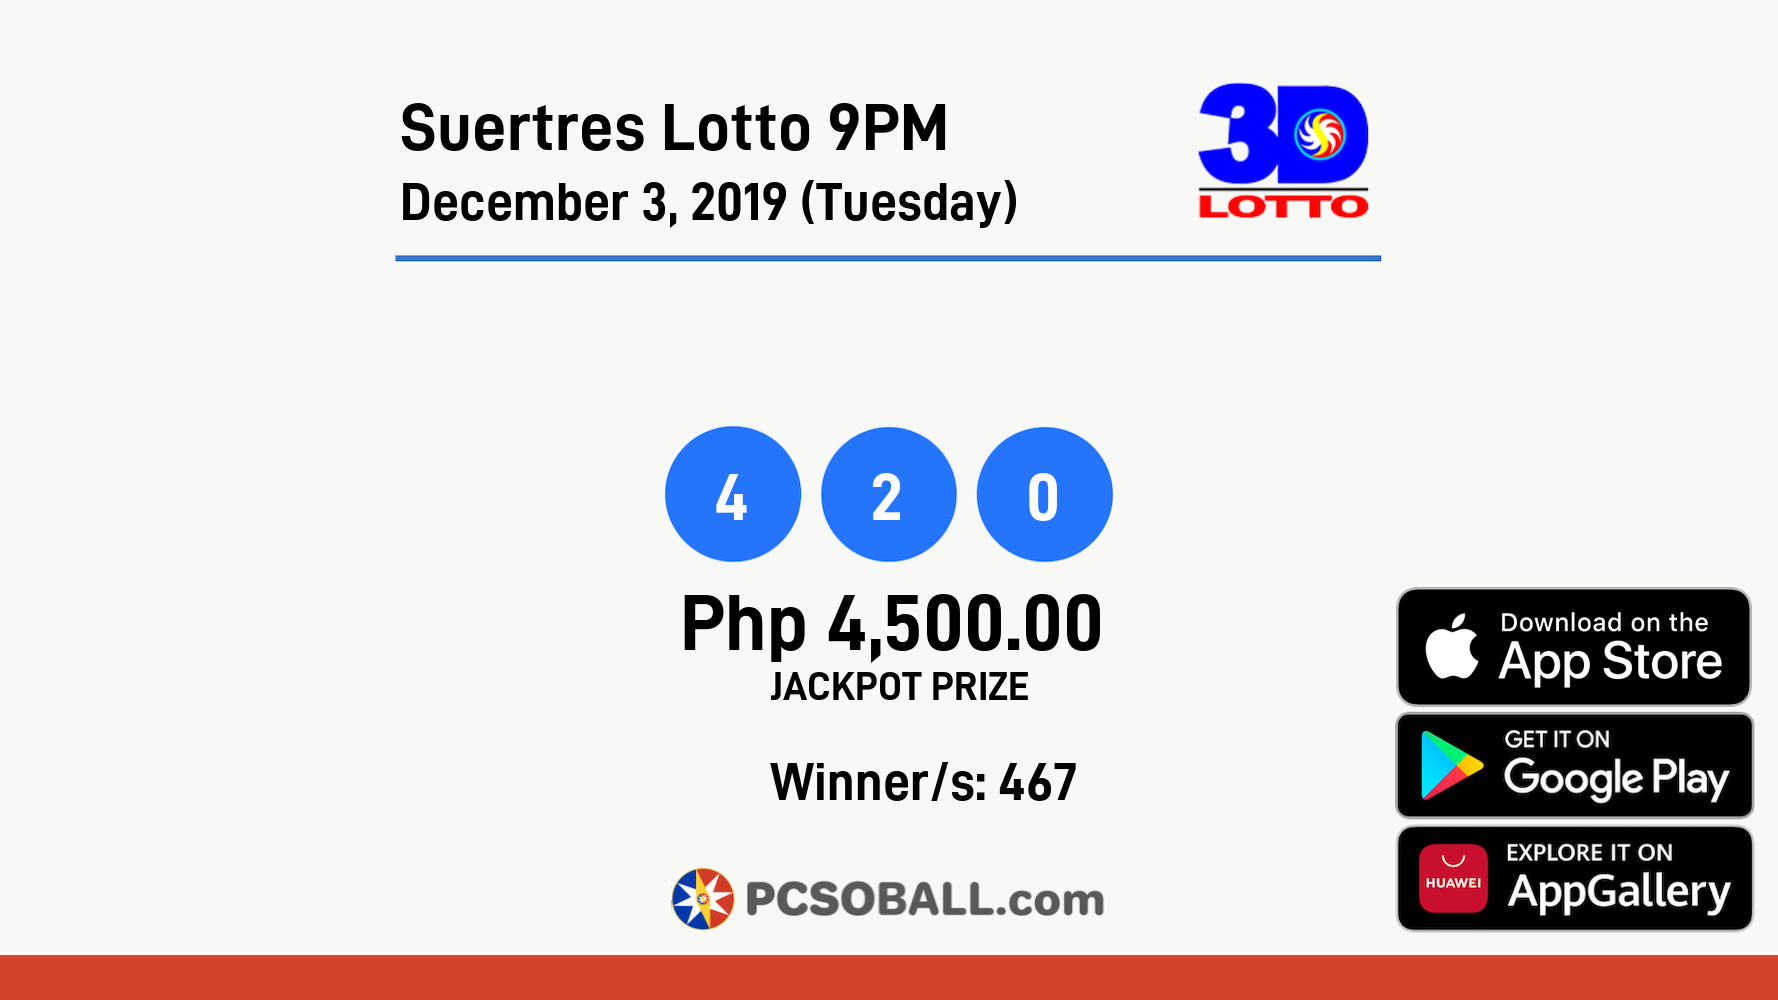 Suertres Lotto 9PM December 3, 2019 (Tuesday) Result